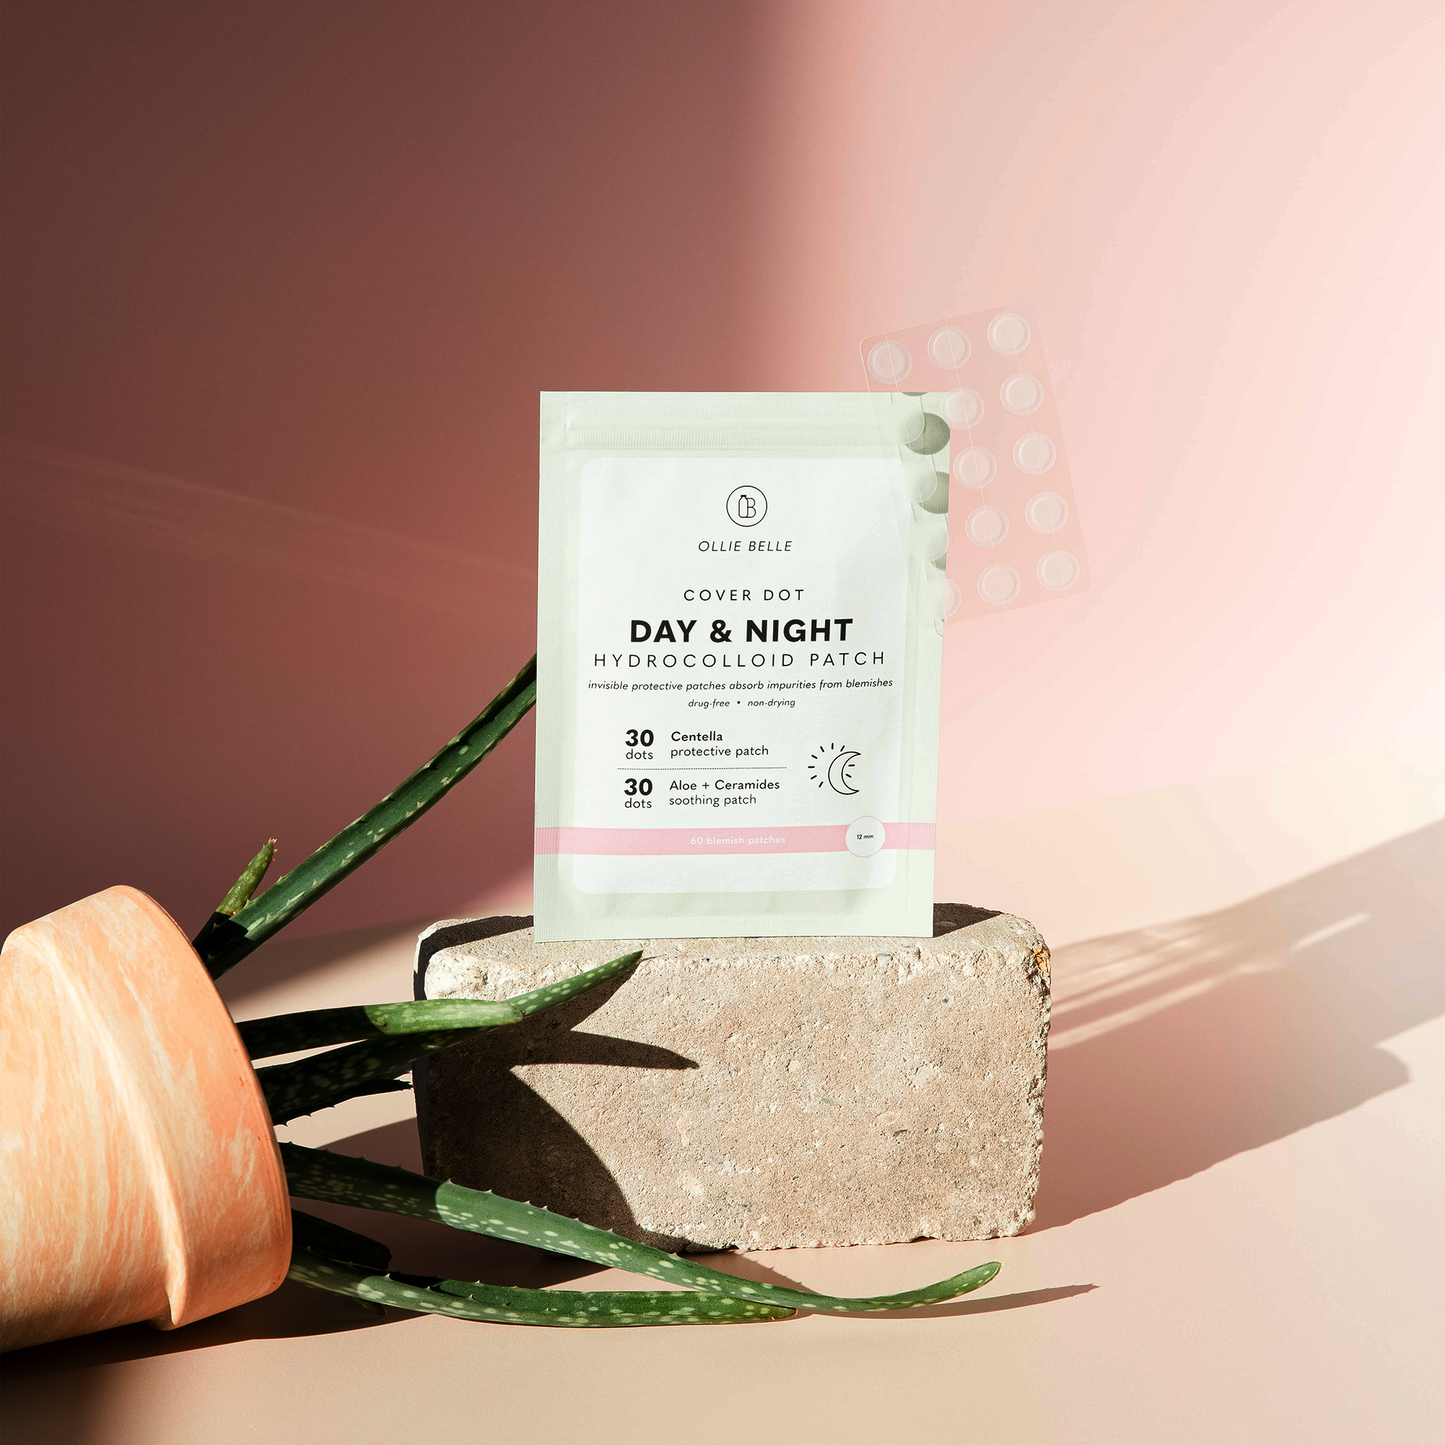 Day & Night - Hydrocolloid Patch Duo - Heal Spots & Stop Redness